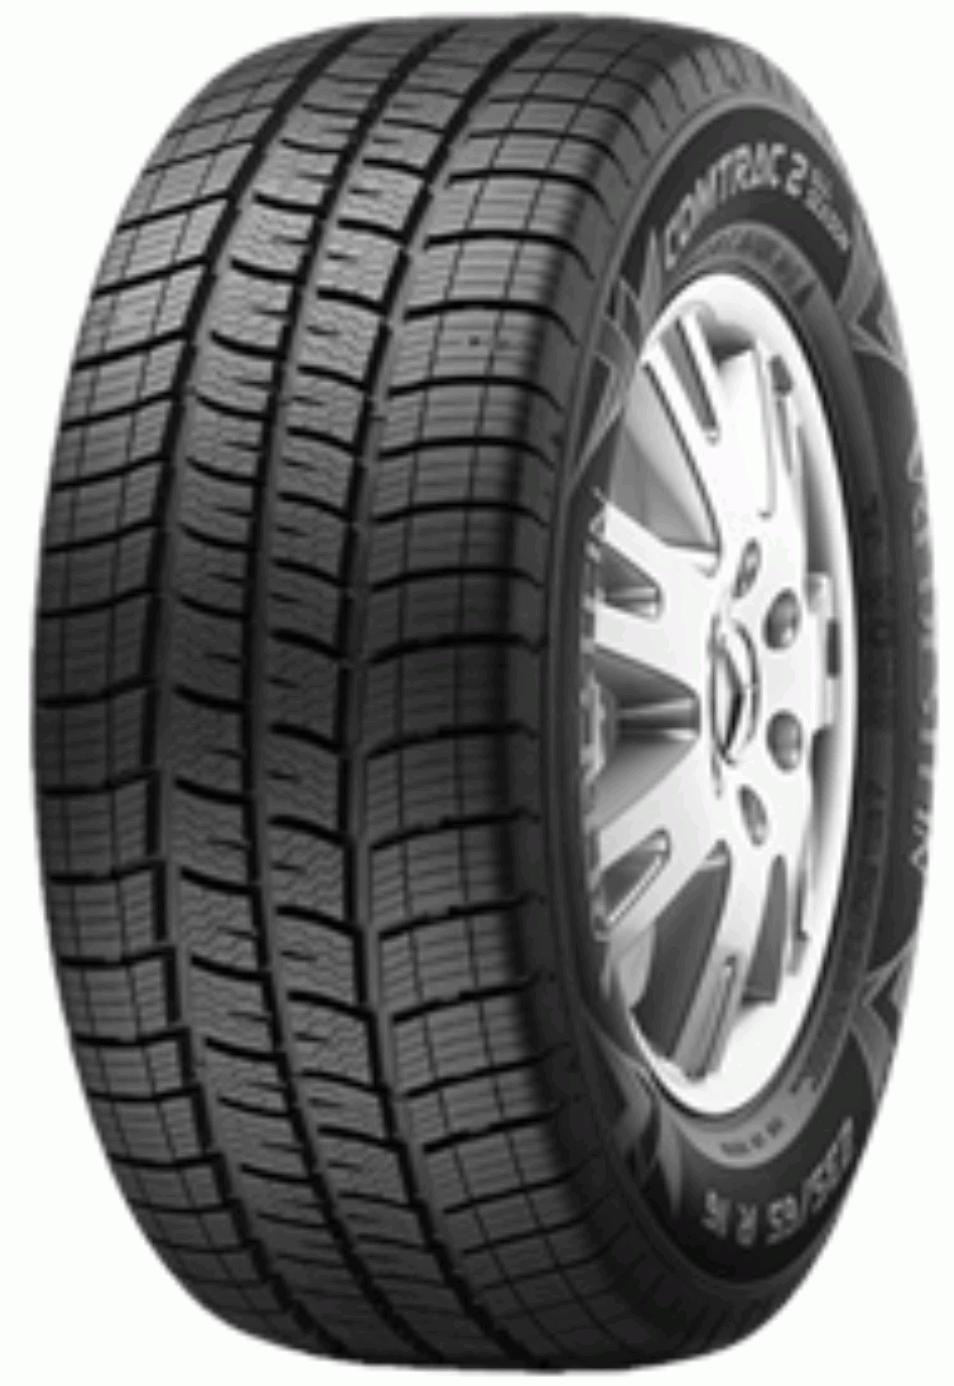 Tyre 2 - Tests All Reviews Season and Vredestein Comtrac